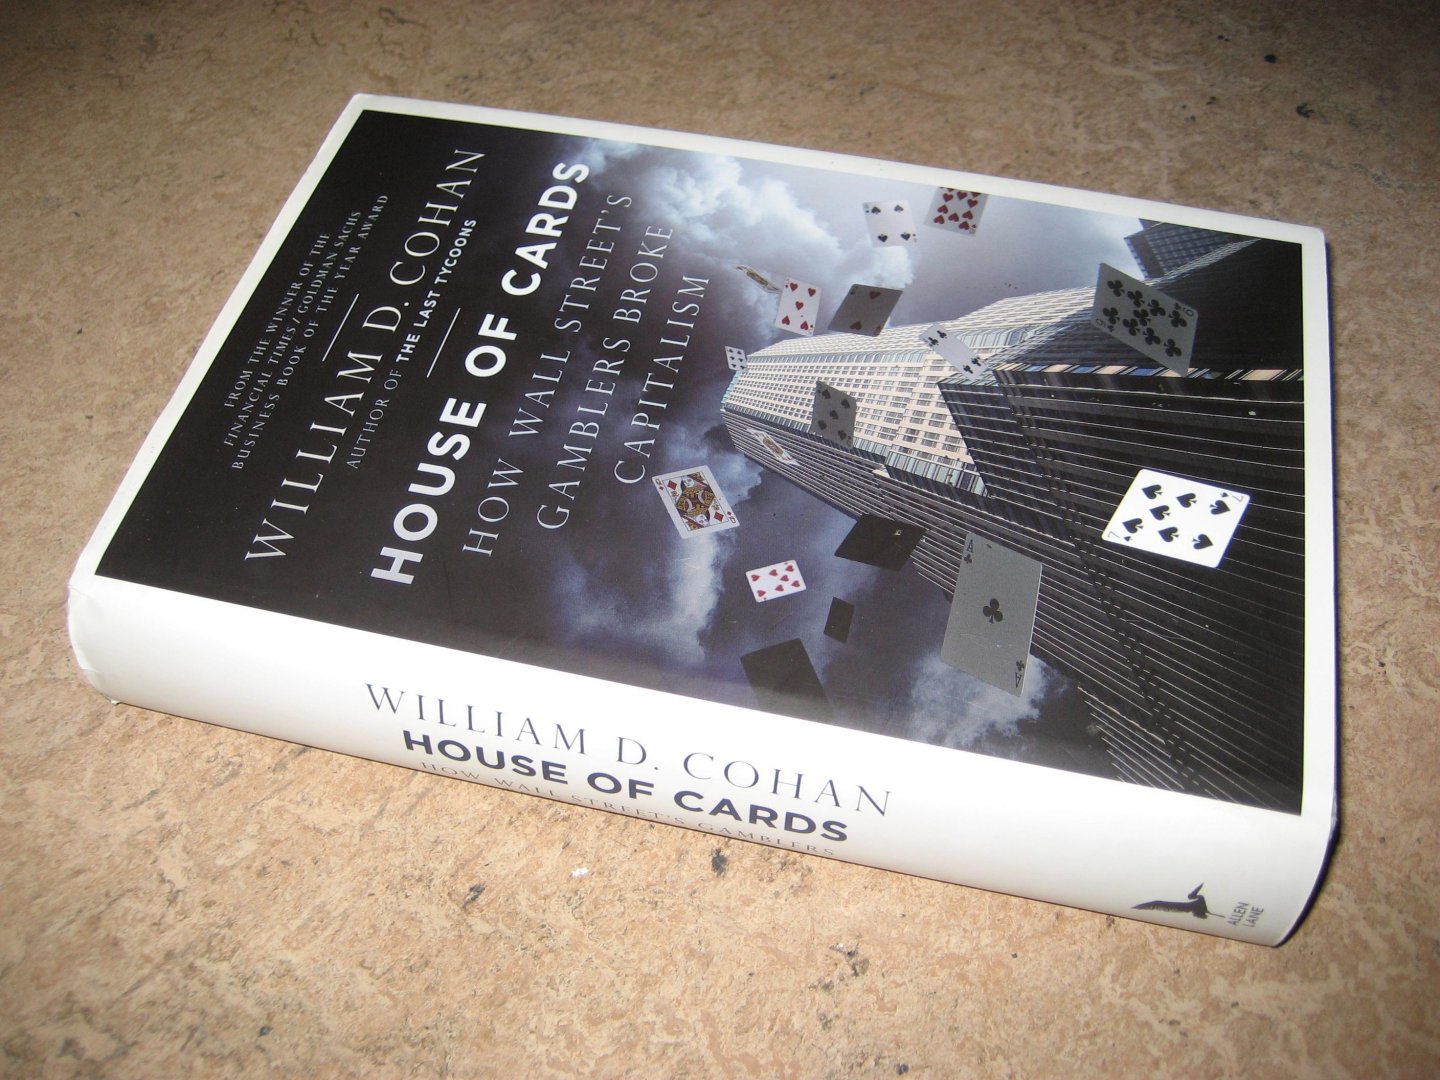 Cohan, William D. - House of Cards. How Wall Street`s Gamblers Broke Capitalism